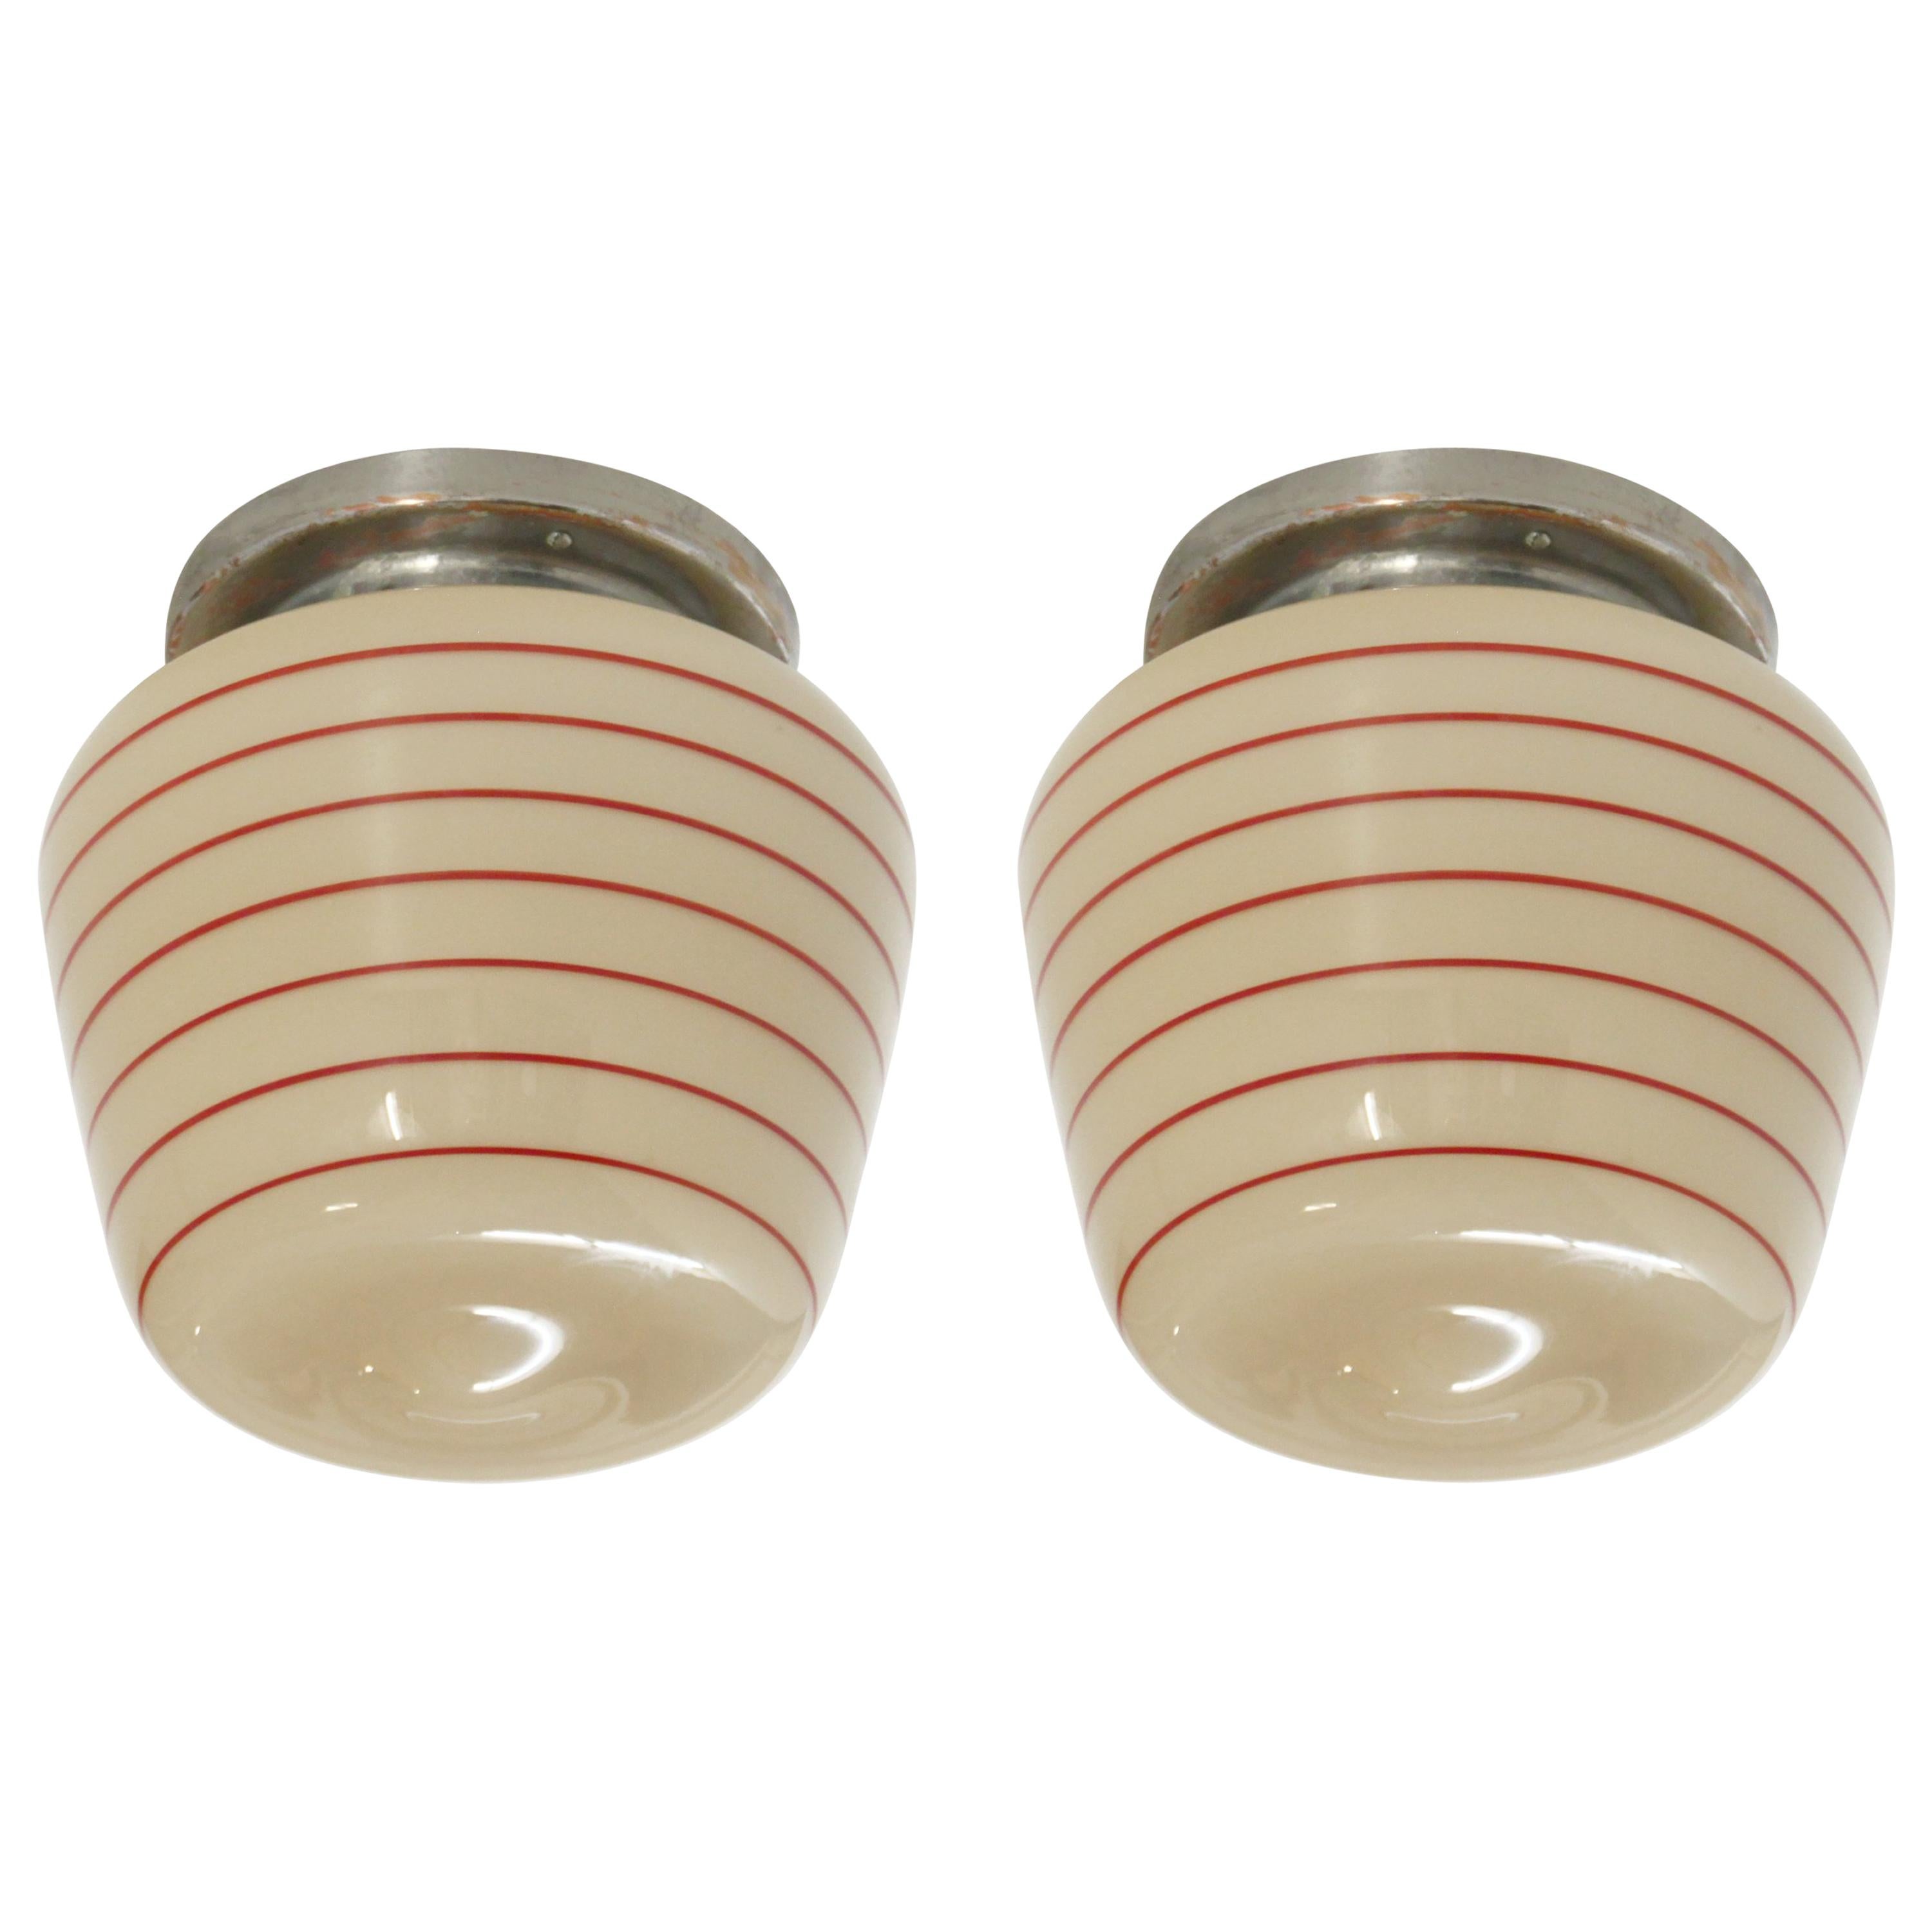 Functionalist Pair of Flush Mount Ceiling Lights, 1950s